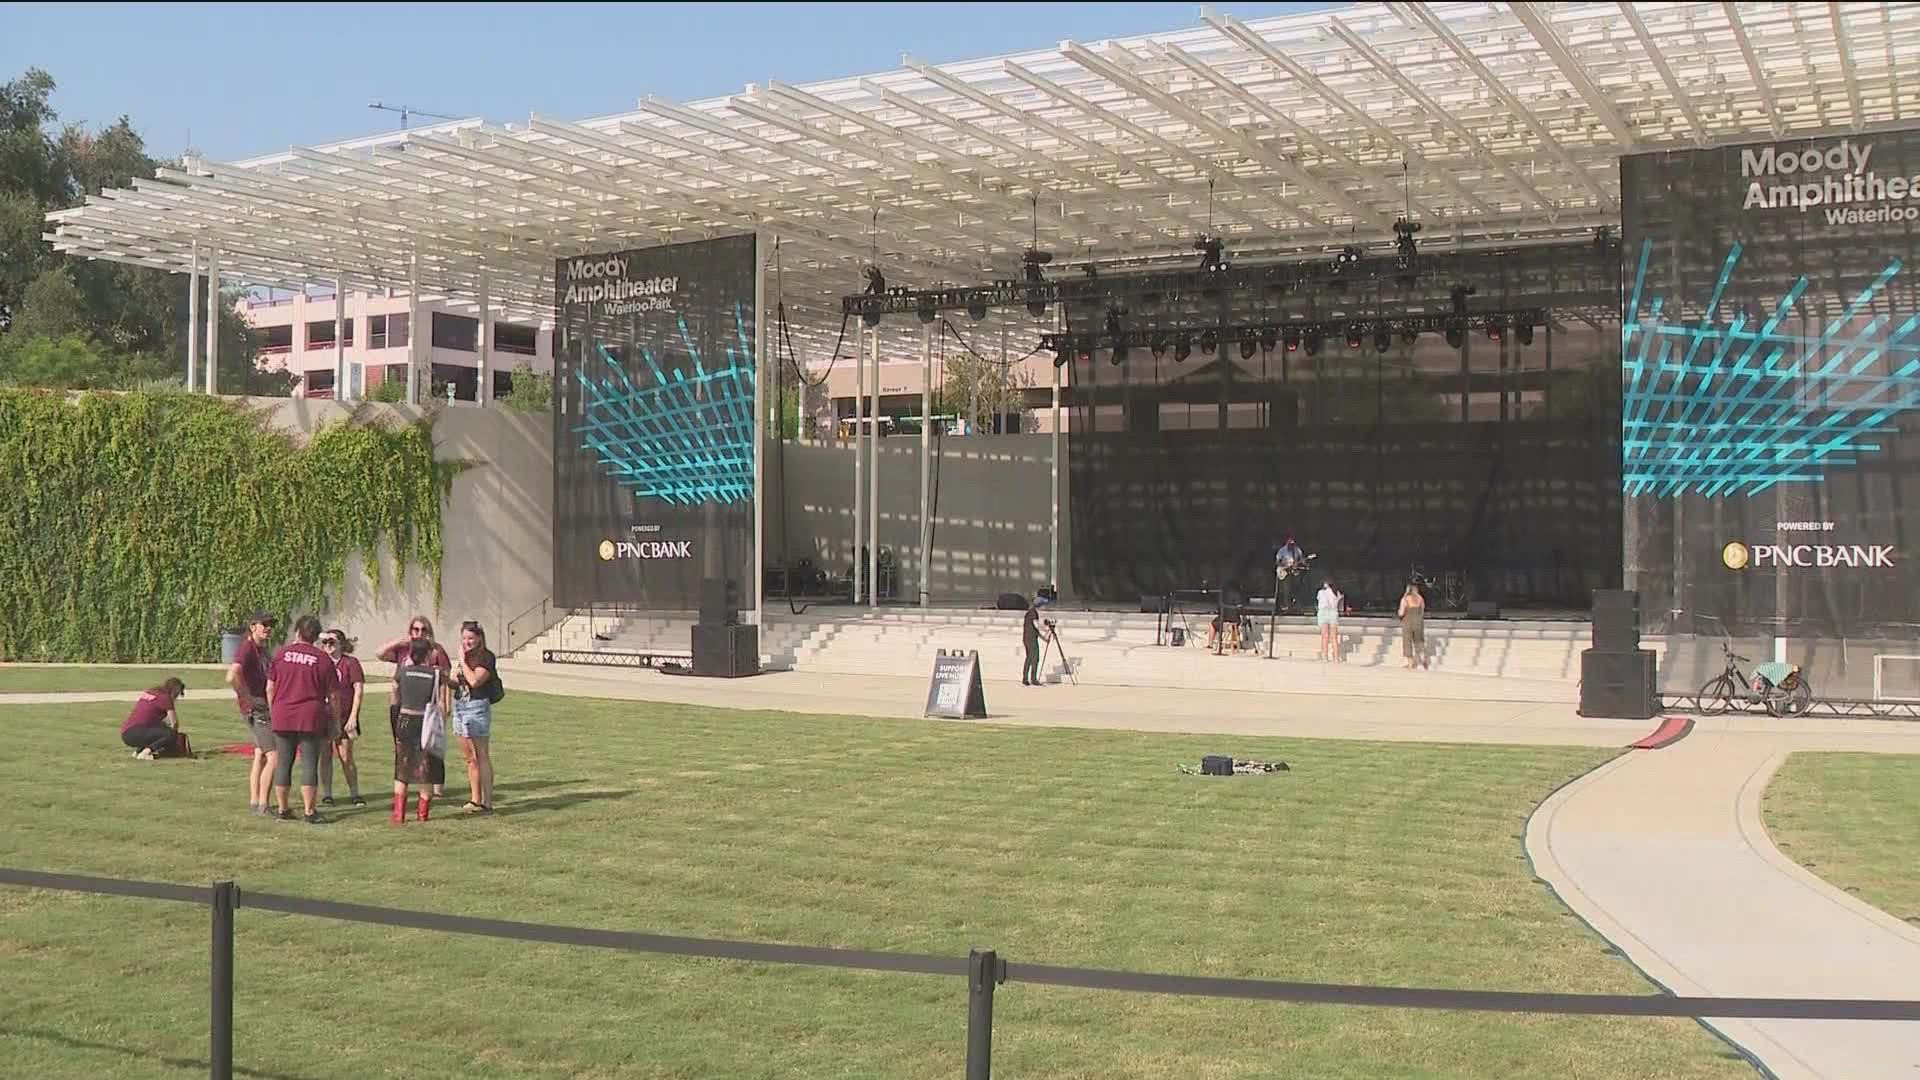 Musicians were on stages across Austin, supporting the Health Alliance for Austin Musicians. KVUE checked in on HAAM Day at Waterloo Park.